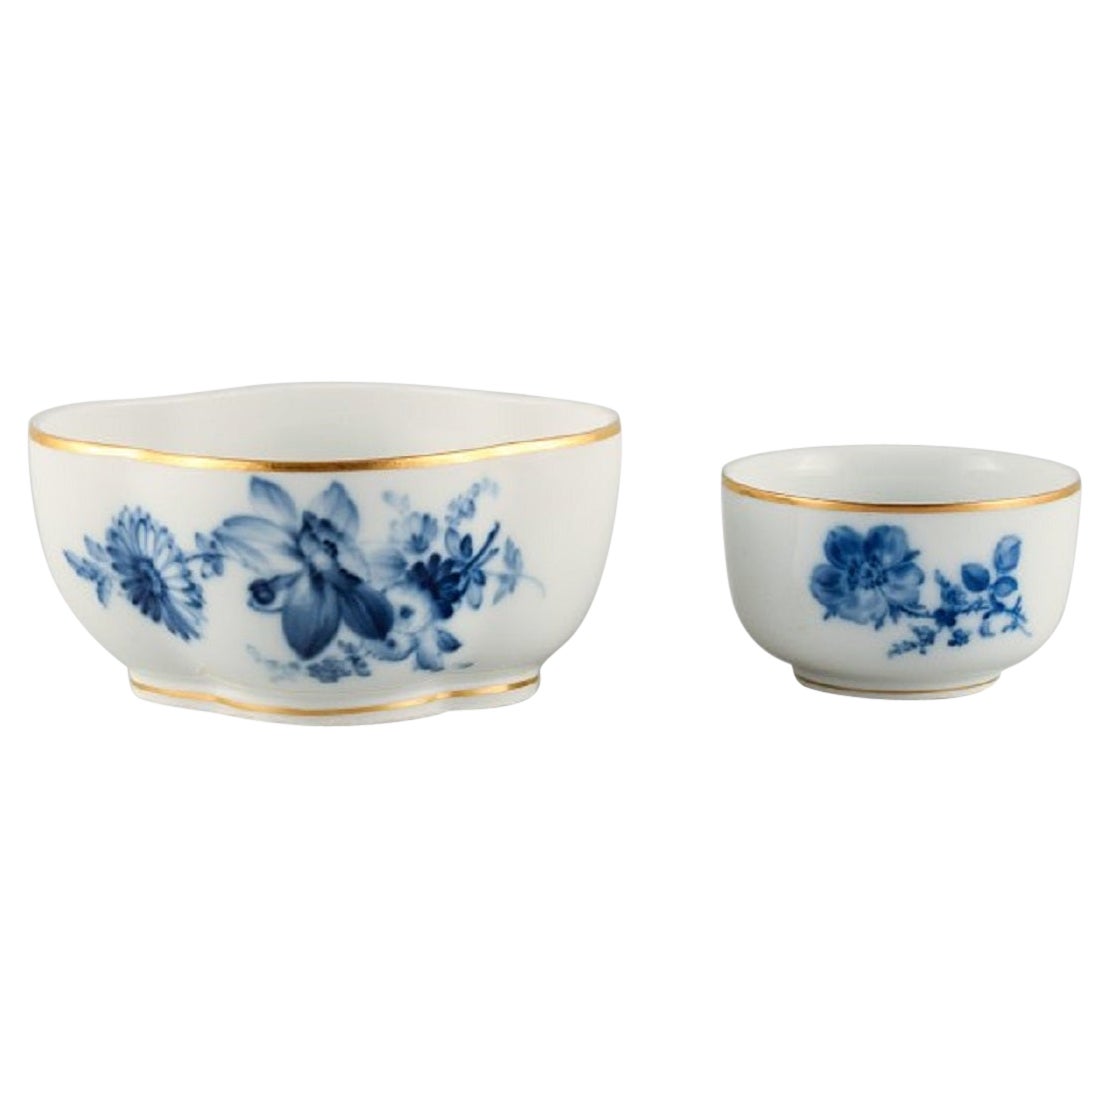 Meissen, Two Bowls Hand-Painted with Blue Flowers and Gold Rim, Late 19th C